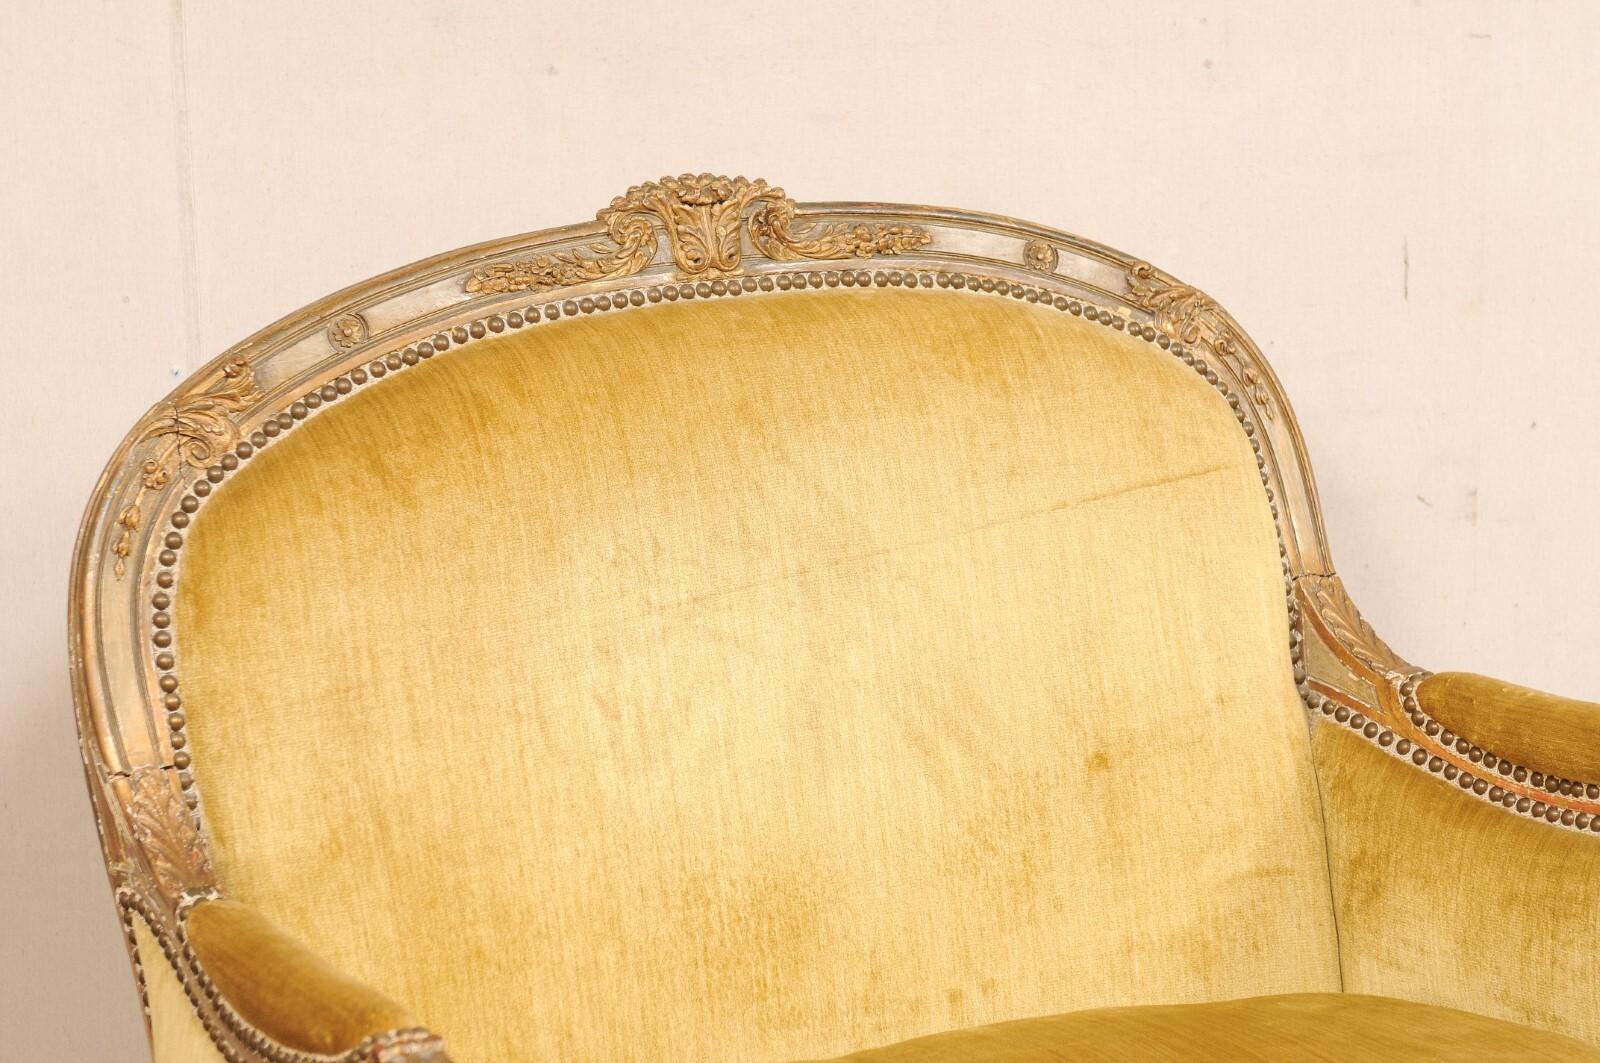 A French Louis XVI style marquise with cut-velvet and nail-head trim. This vintage settee from France has a softly arched back and bowed shape at front, it showcases the Louis XVI decorative vocabulary with tightly scrolled knuckles, petite flower